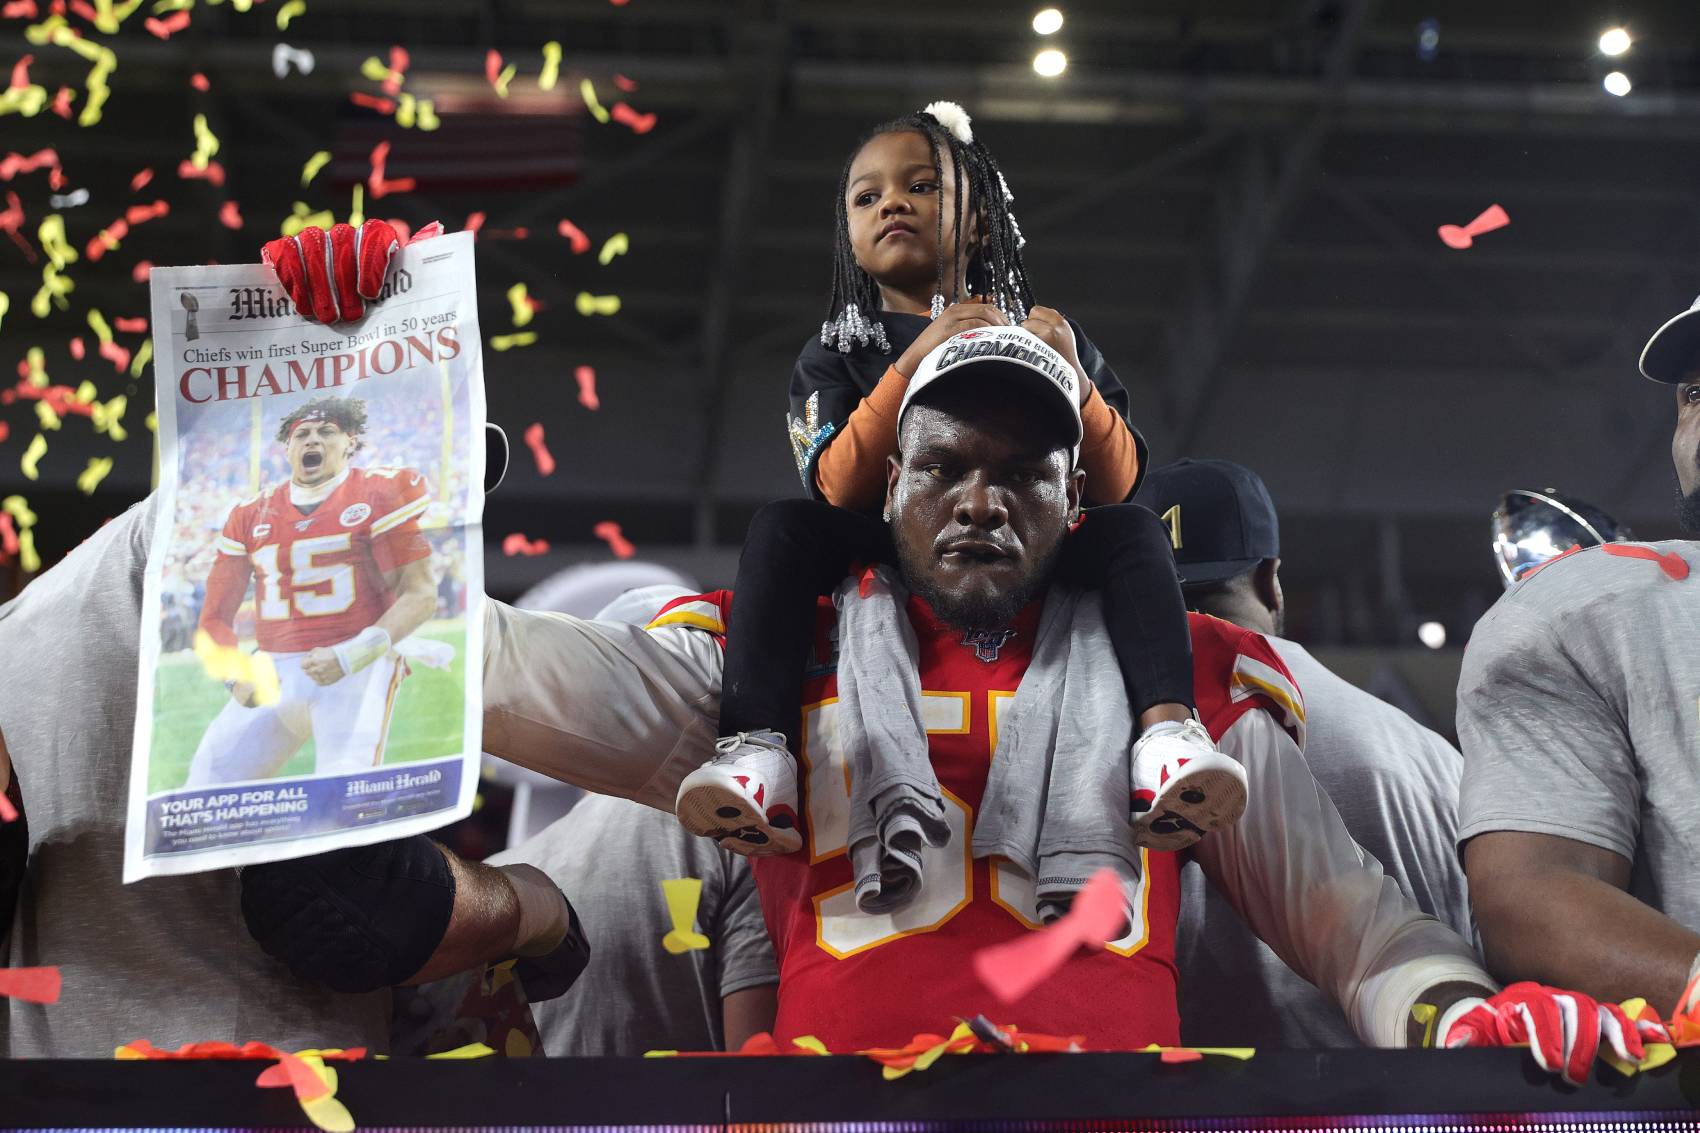 Super Bowl champion and Kansas City Chiefs star Frank Clark is giving back to the local community after a tragic murder.